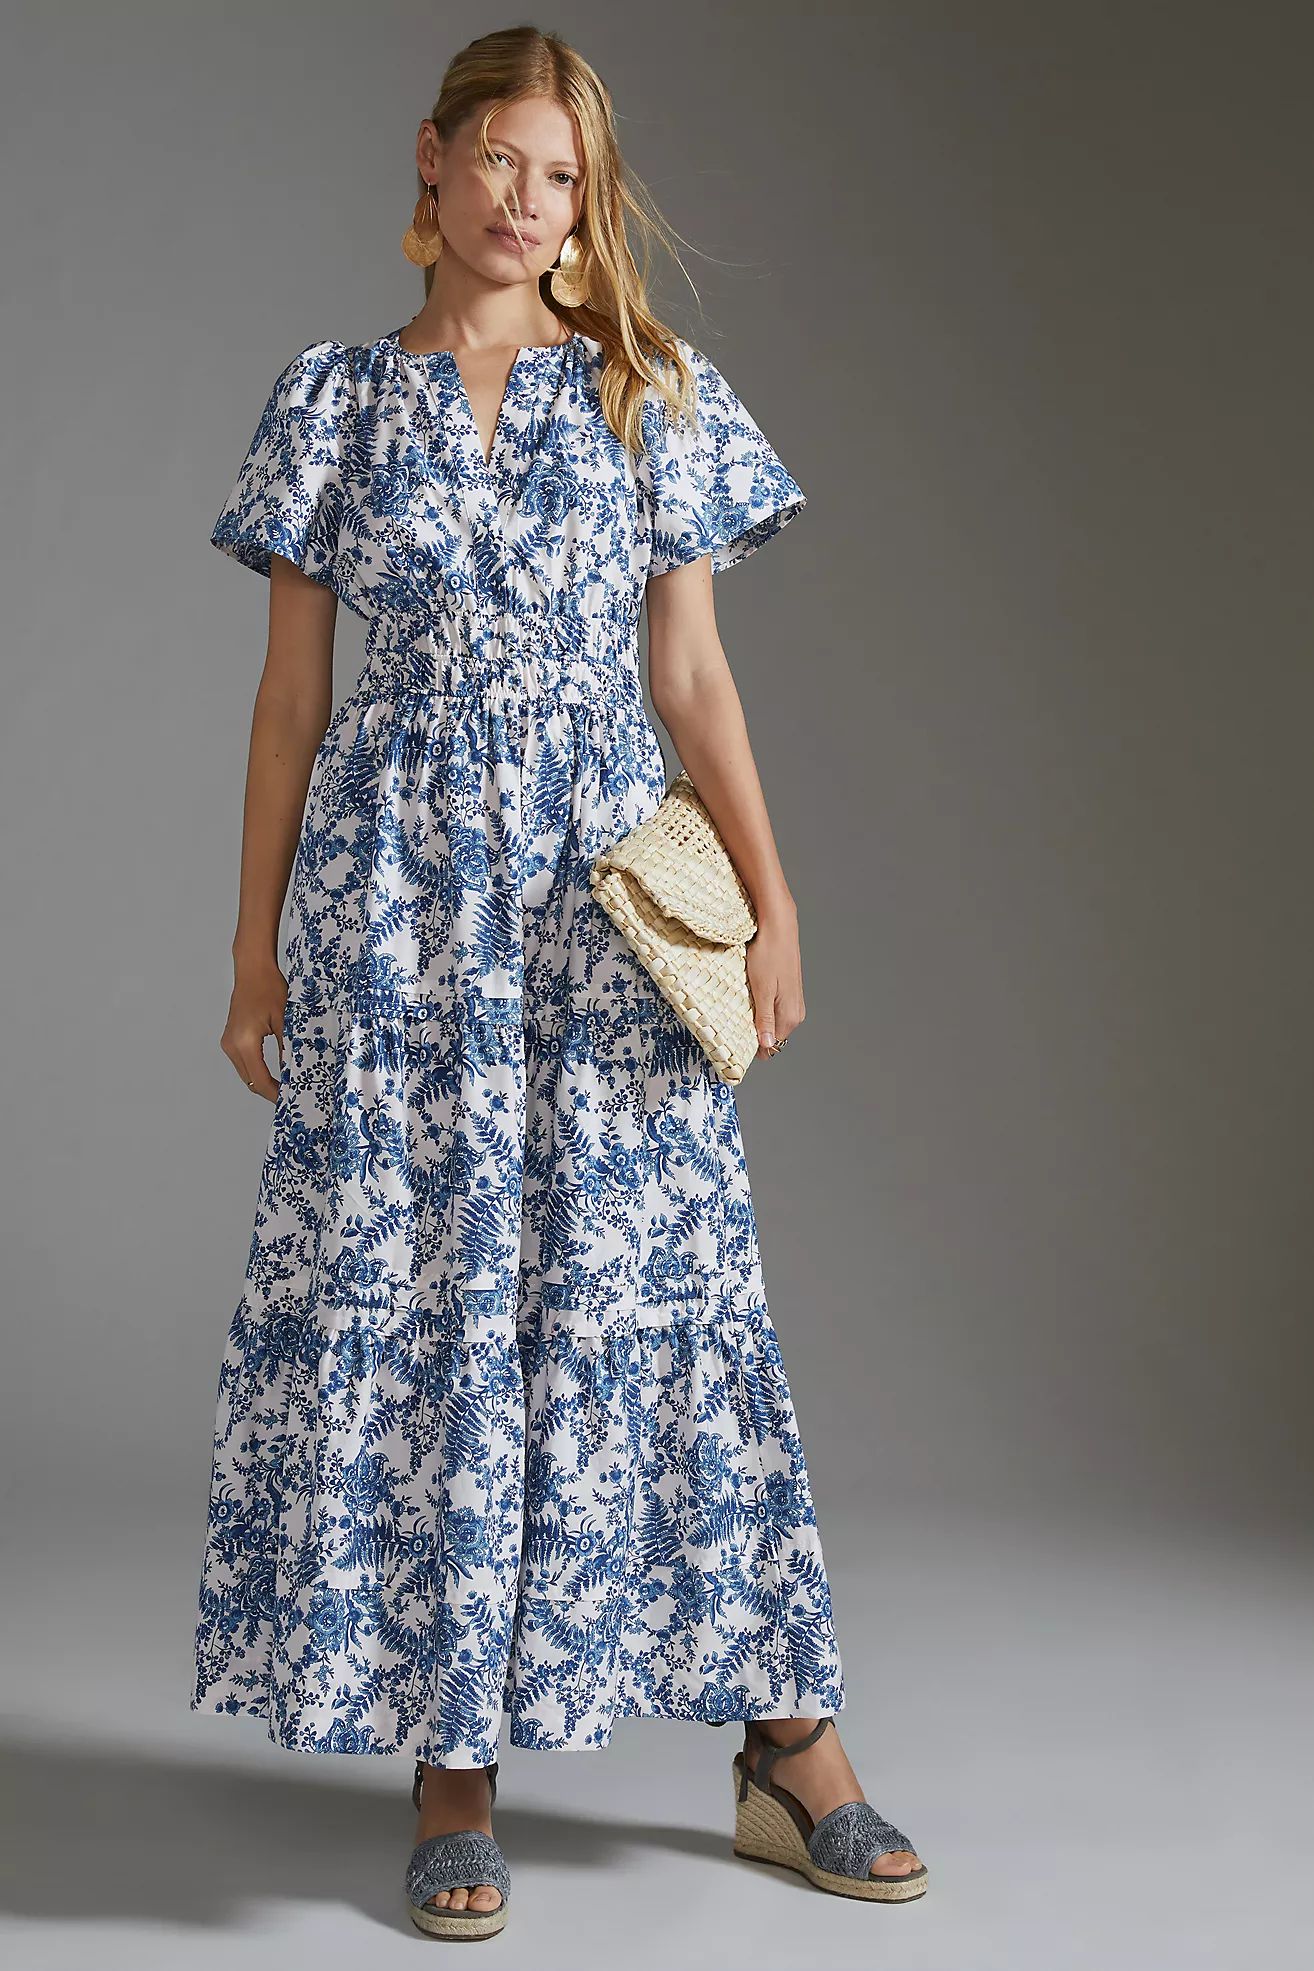 The Somerset Collection by Anthropologie | Anthropologie (US)